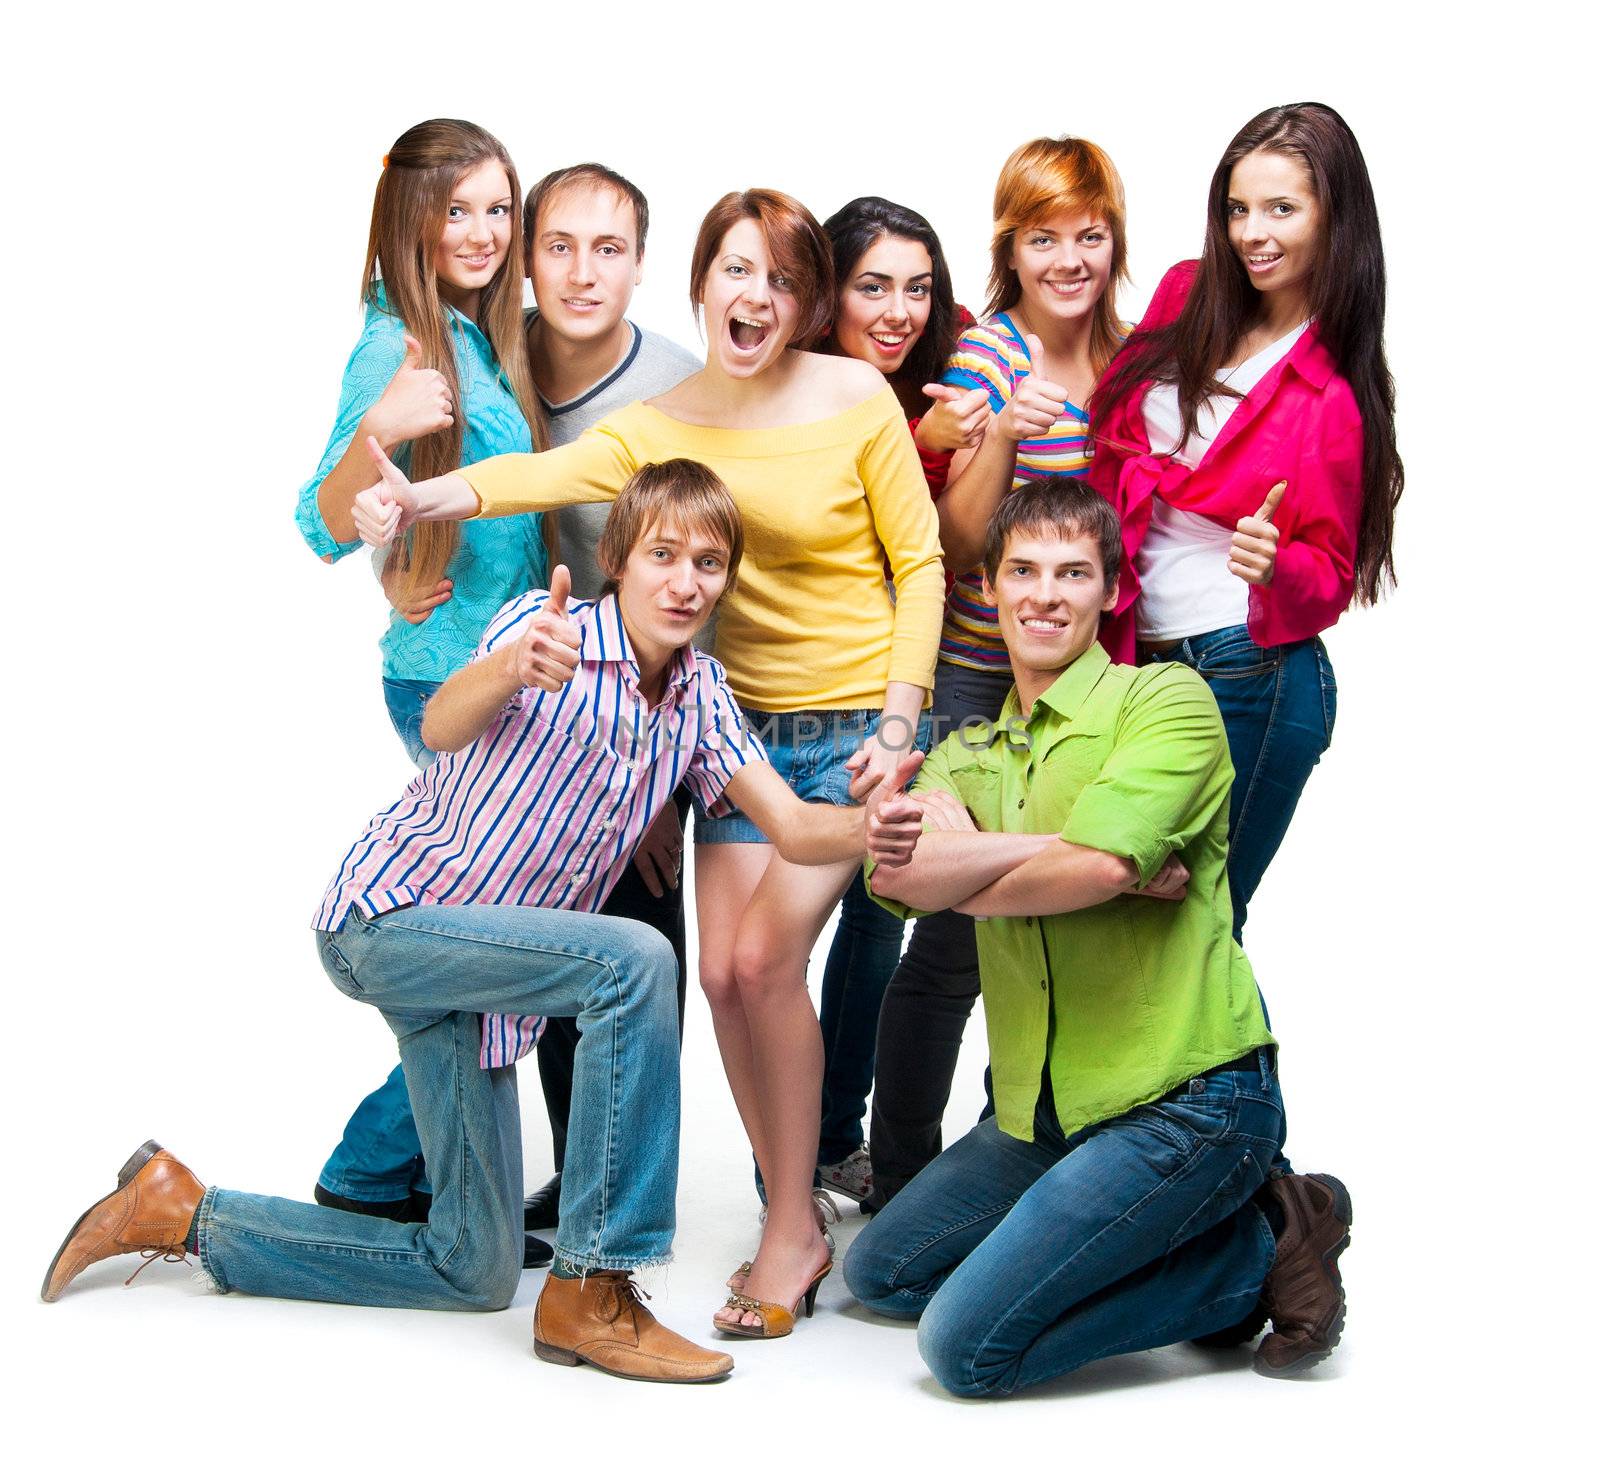 group of casual happy people smiling and standing isolated over a white background